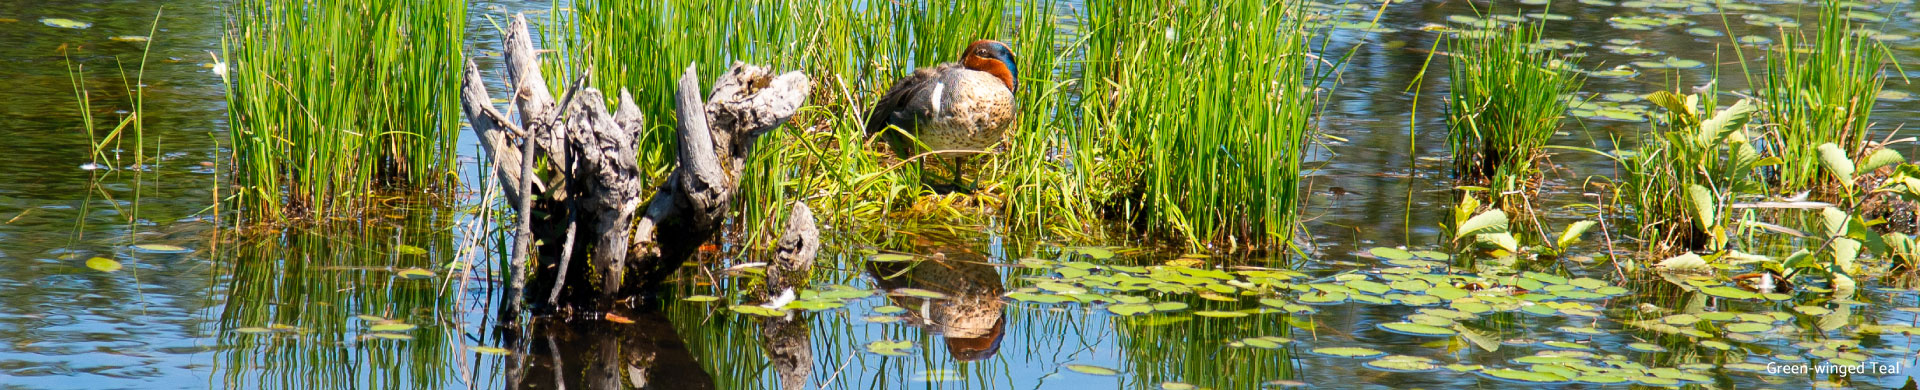 green-winged-teal